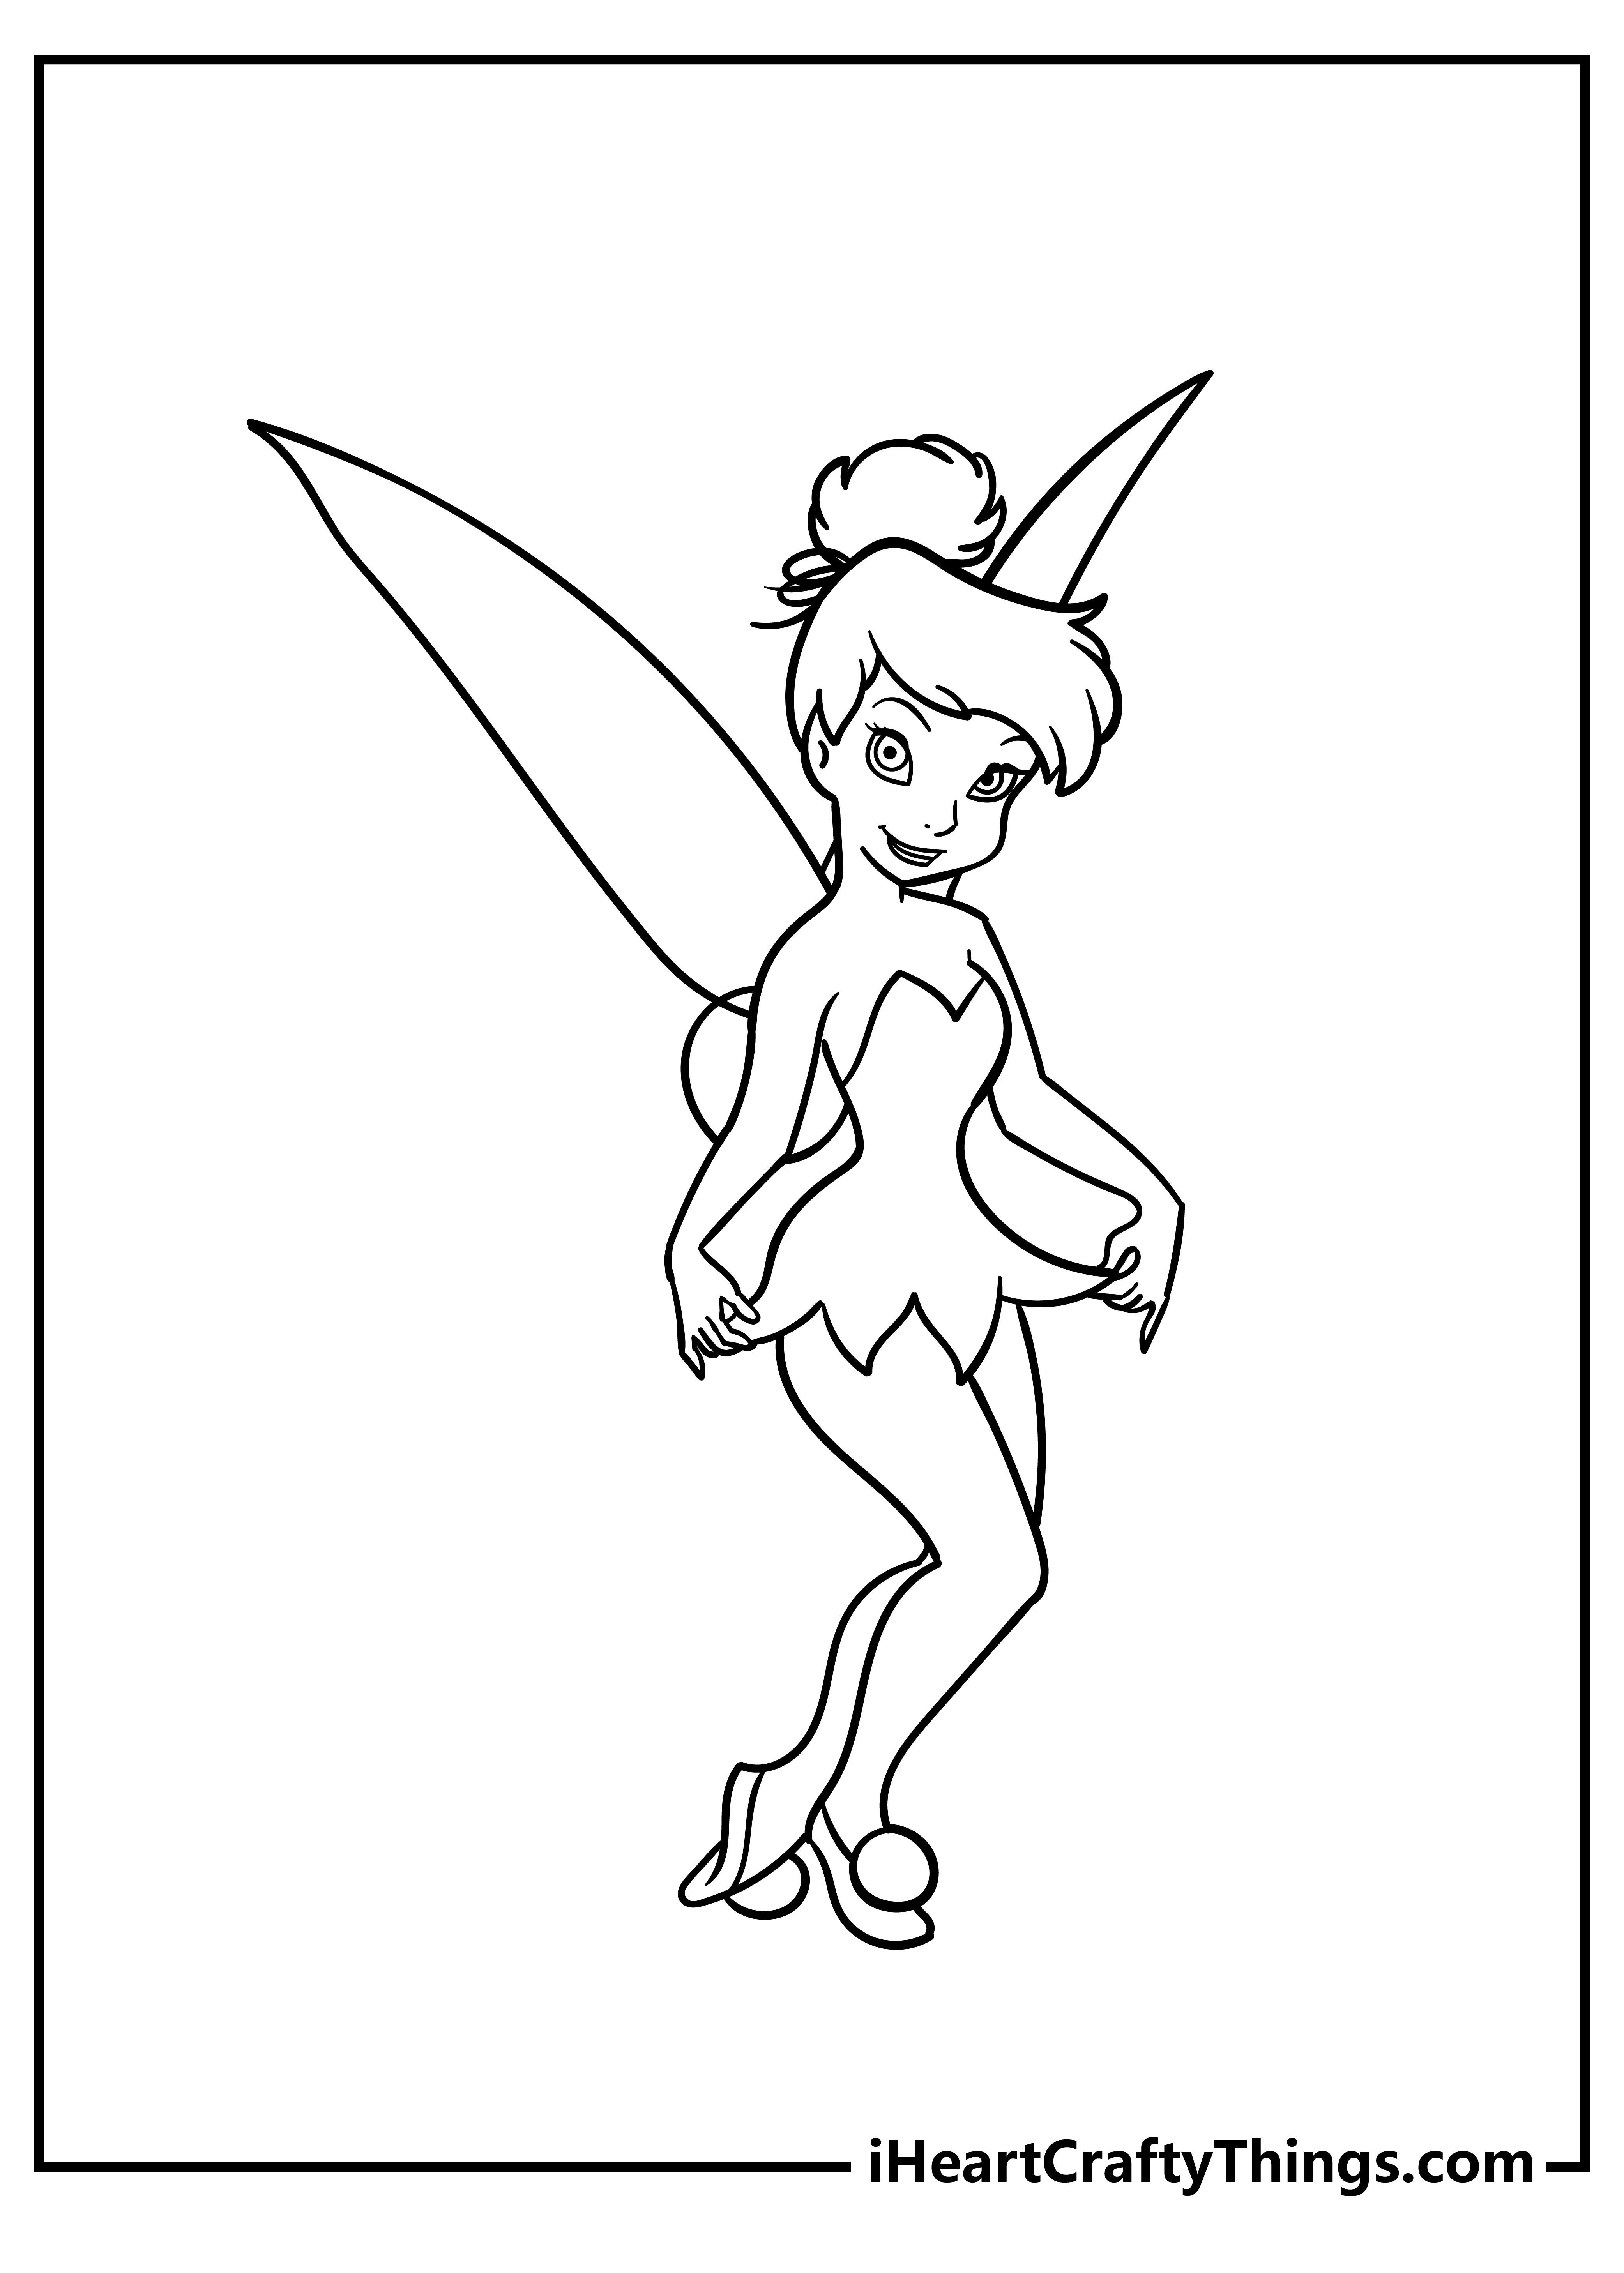 Tinkerbell coloring pages free printables